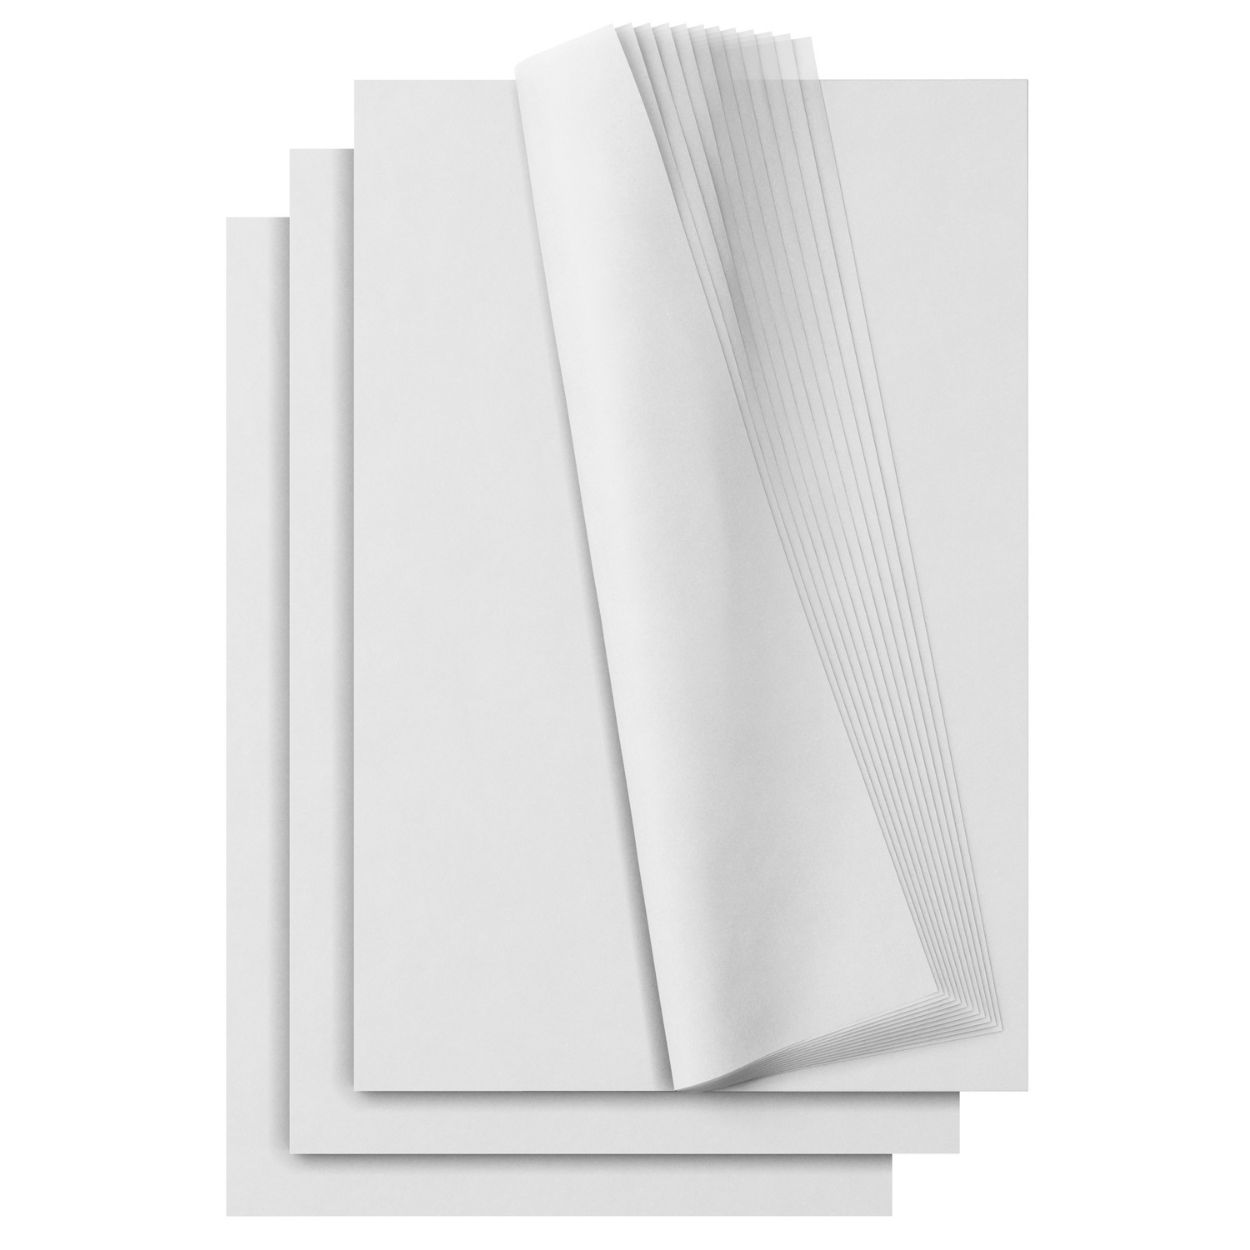 BABCOR Packaging: White Satinwrap Flat Tissue Sheets - 20 x 30 in.